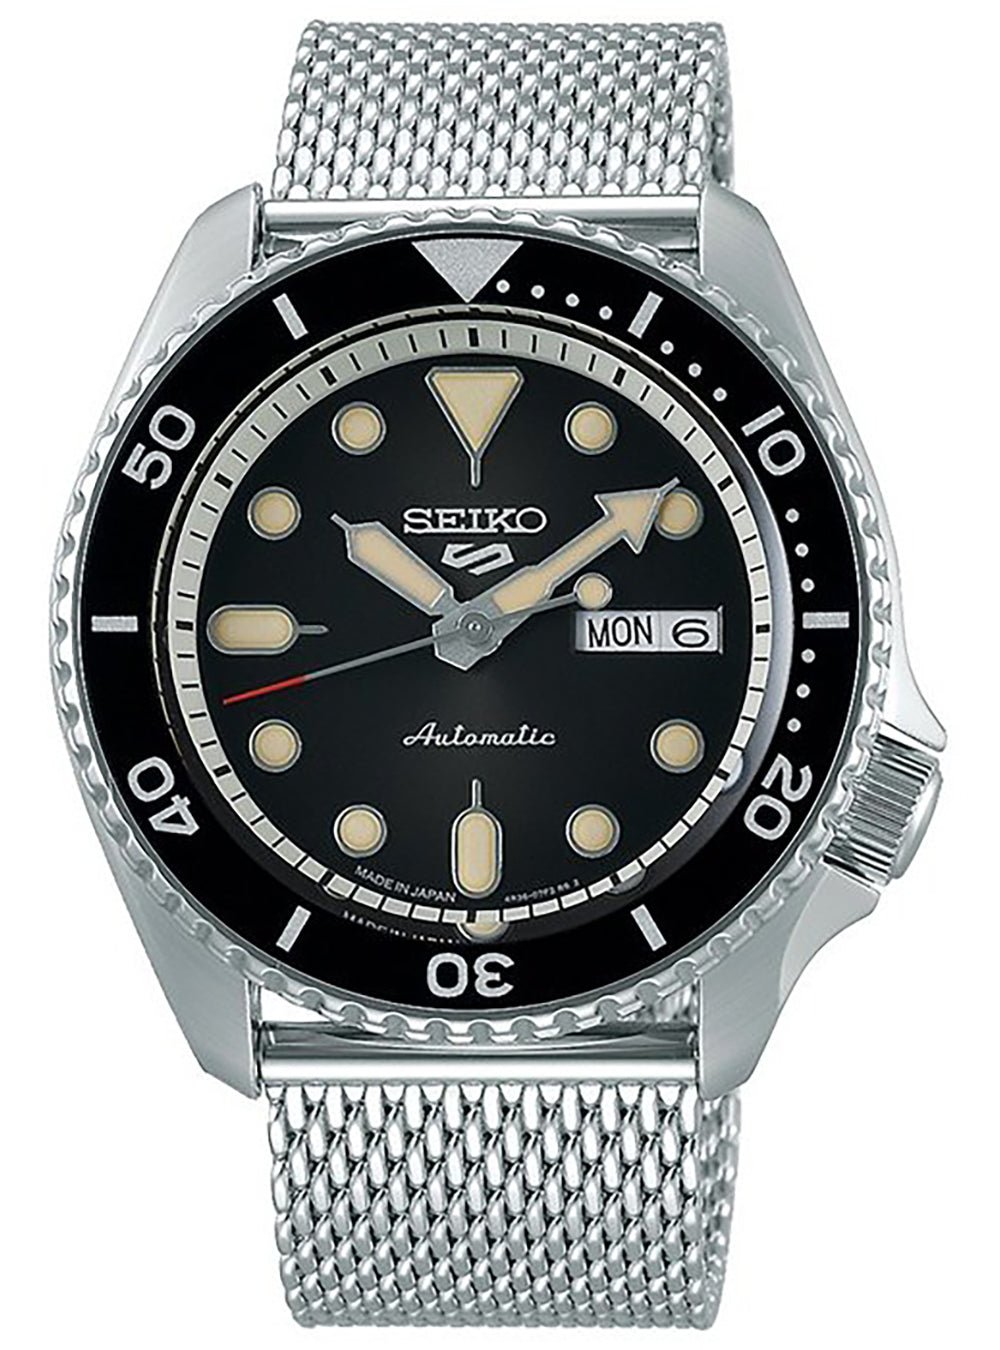 Seiko 5 Sports Suits Style SBSA017 Automatic Watches Mechanical 2019 Made in japan JDM WRISTWATCHjapan-select